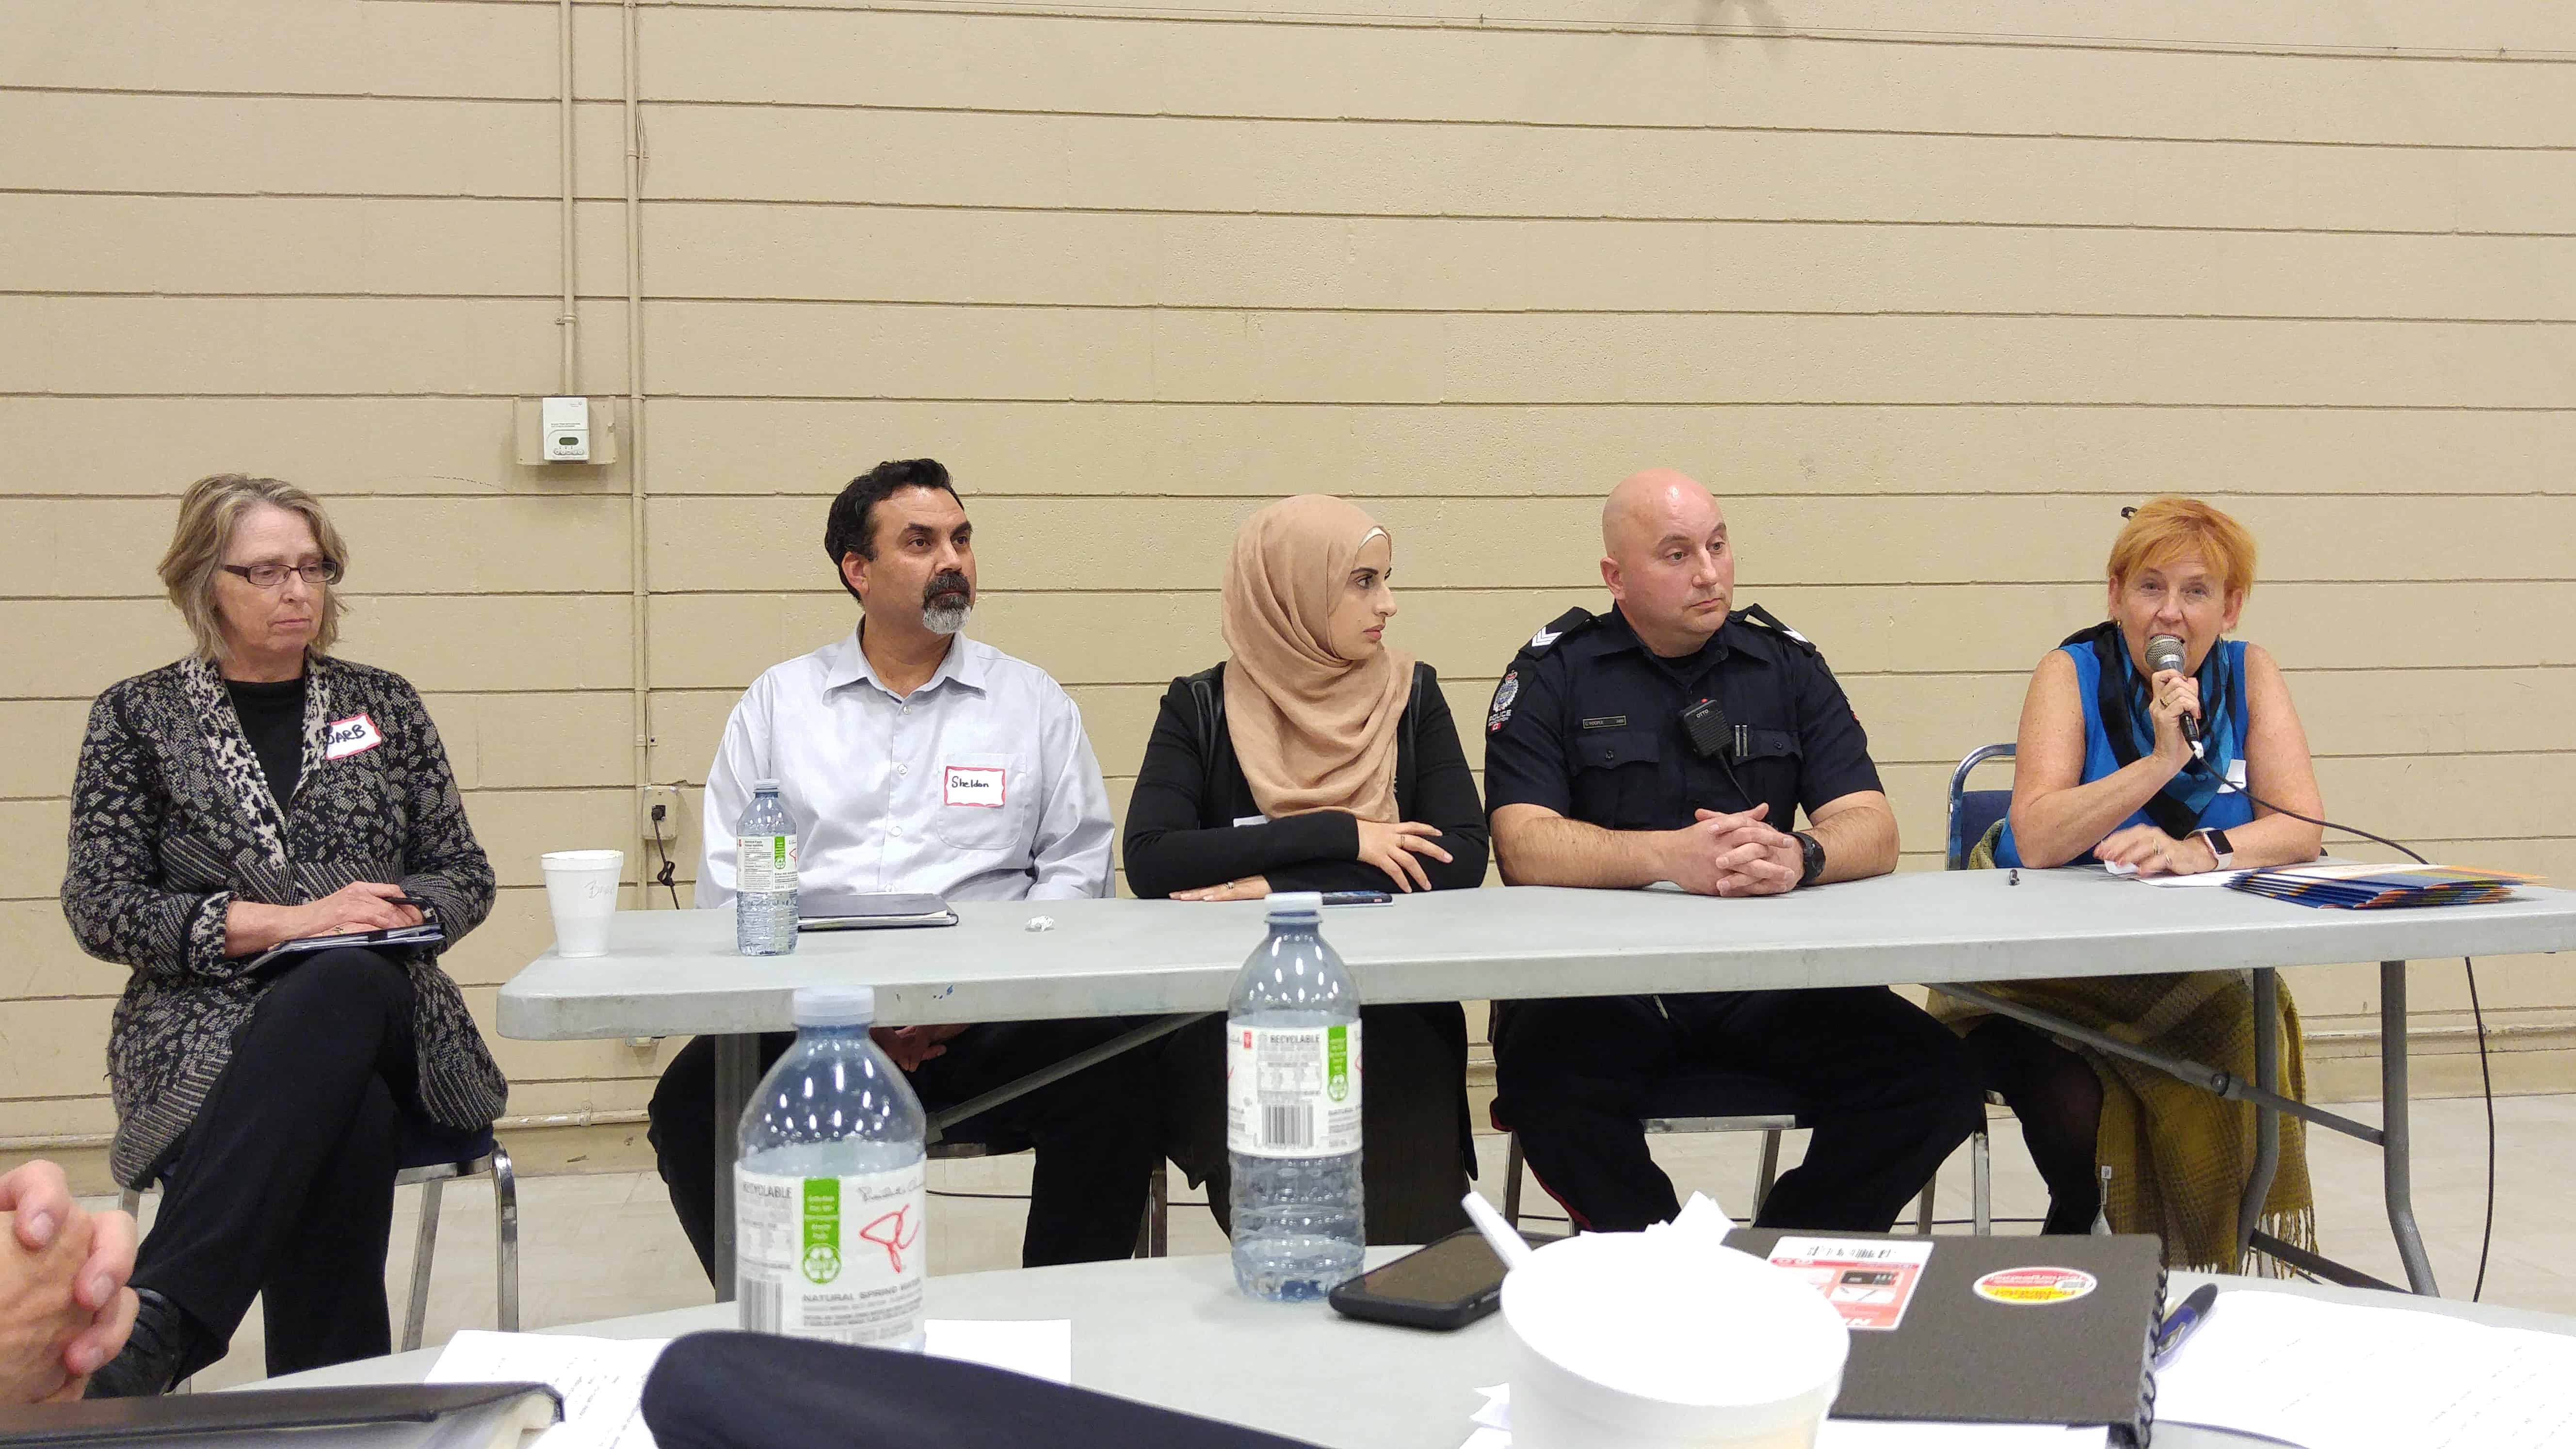 From left to right: Barbara Ursuliak, Sheldon Hughes, Fatmeh Kalouti, Sgt. Curtis Hoople, and Jan Fox talk about collaborative safety initiatives during the neighbourhood safety panel discussion.| Hamdi Issawi